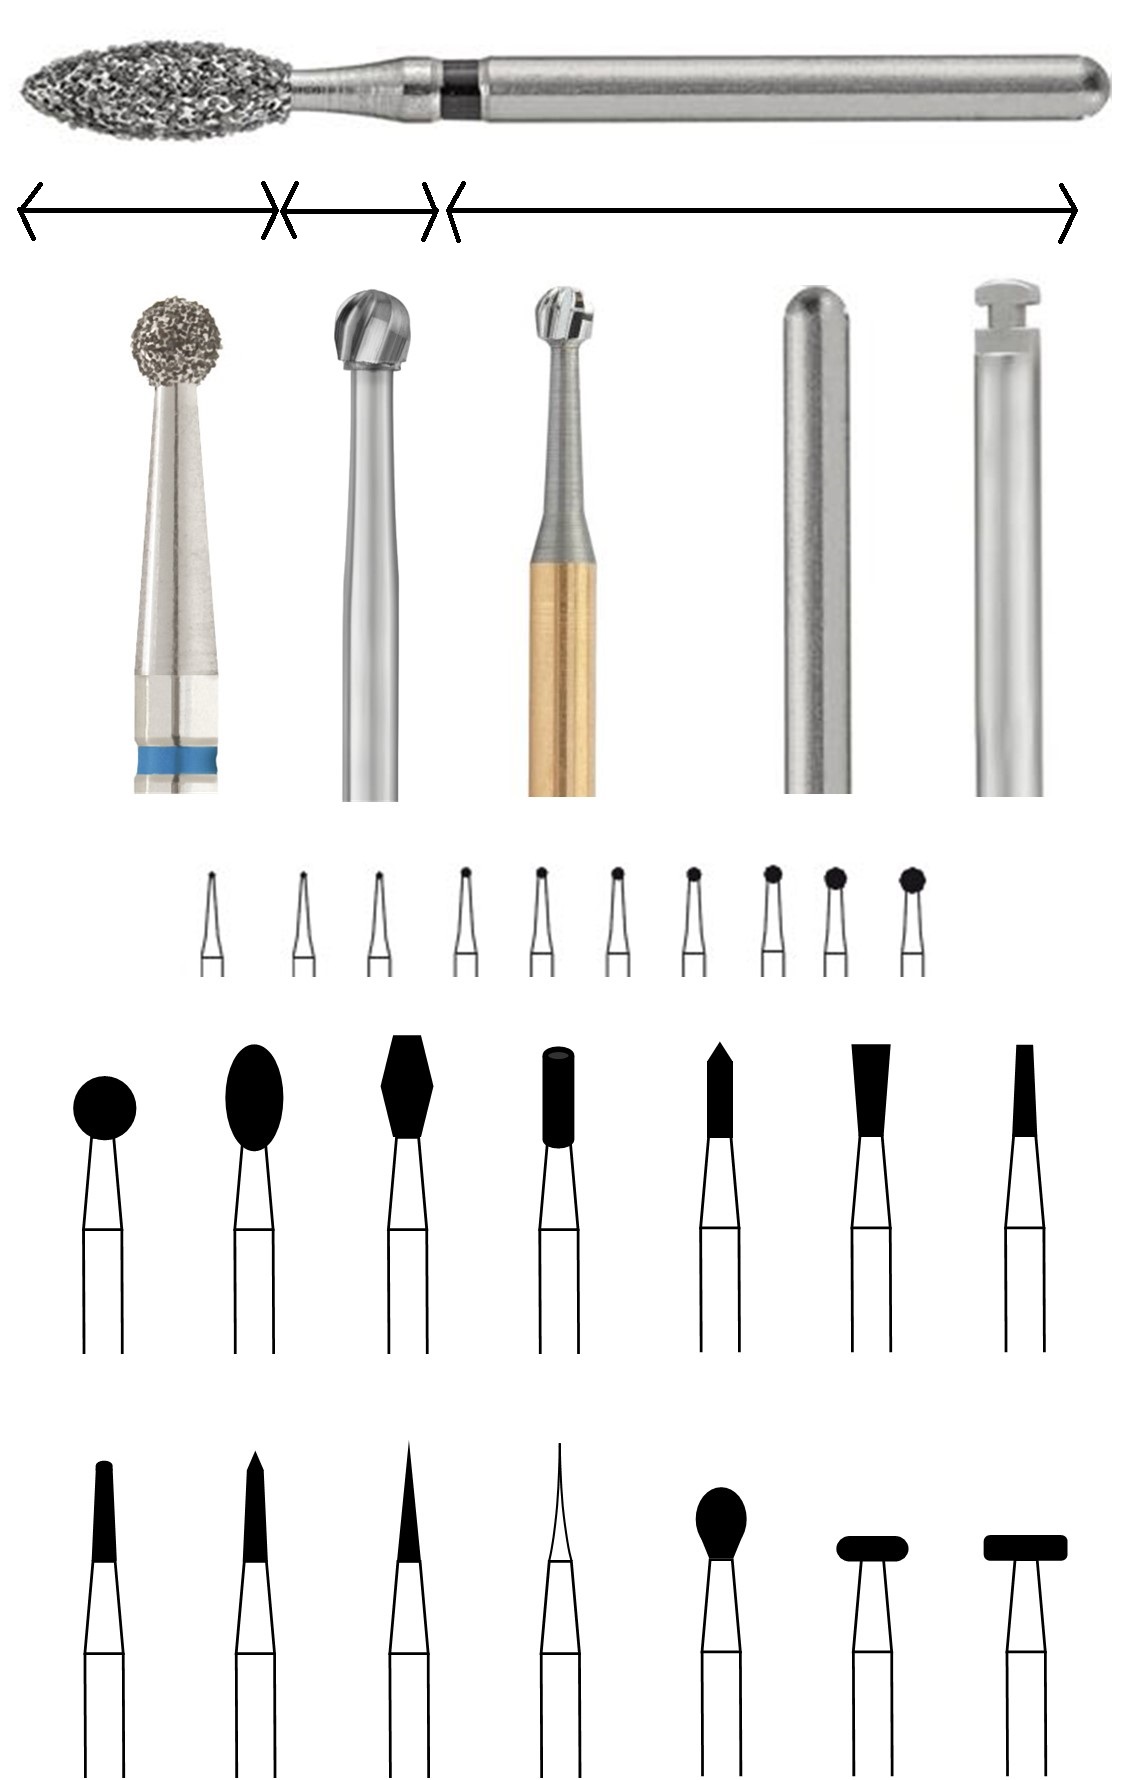 The cutting edge of dental instruments